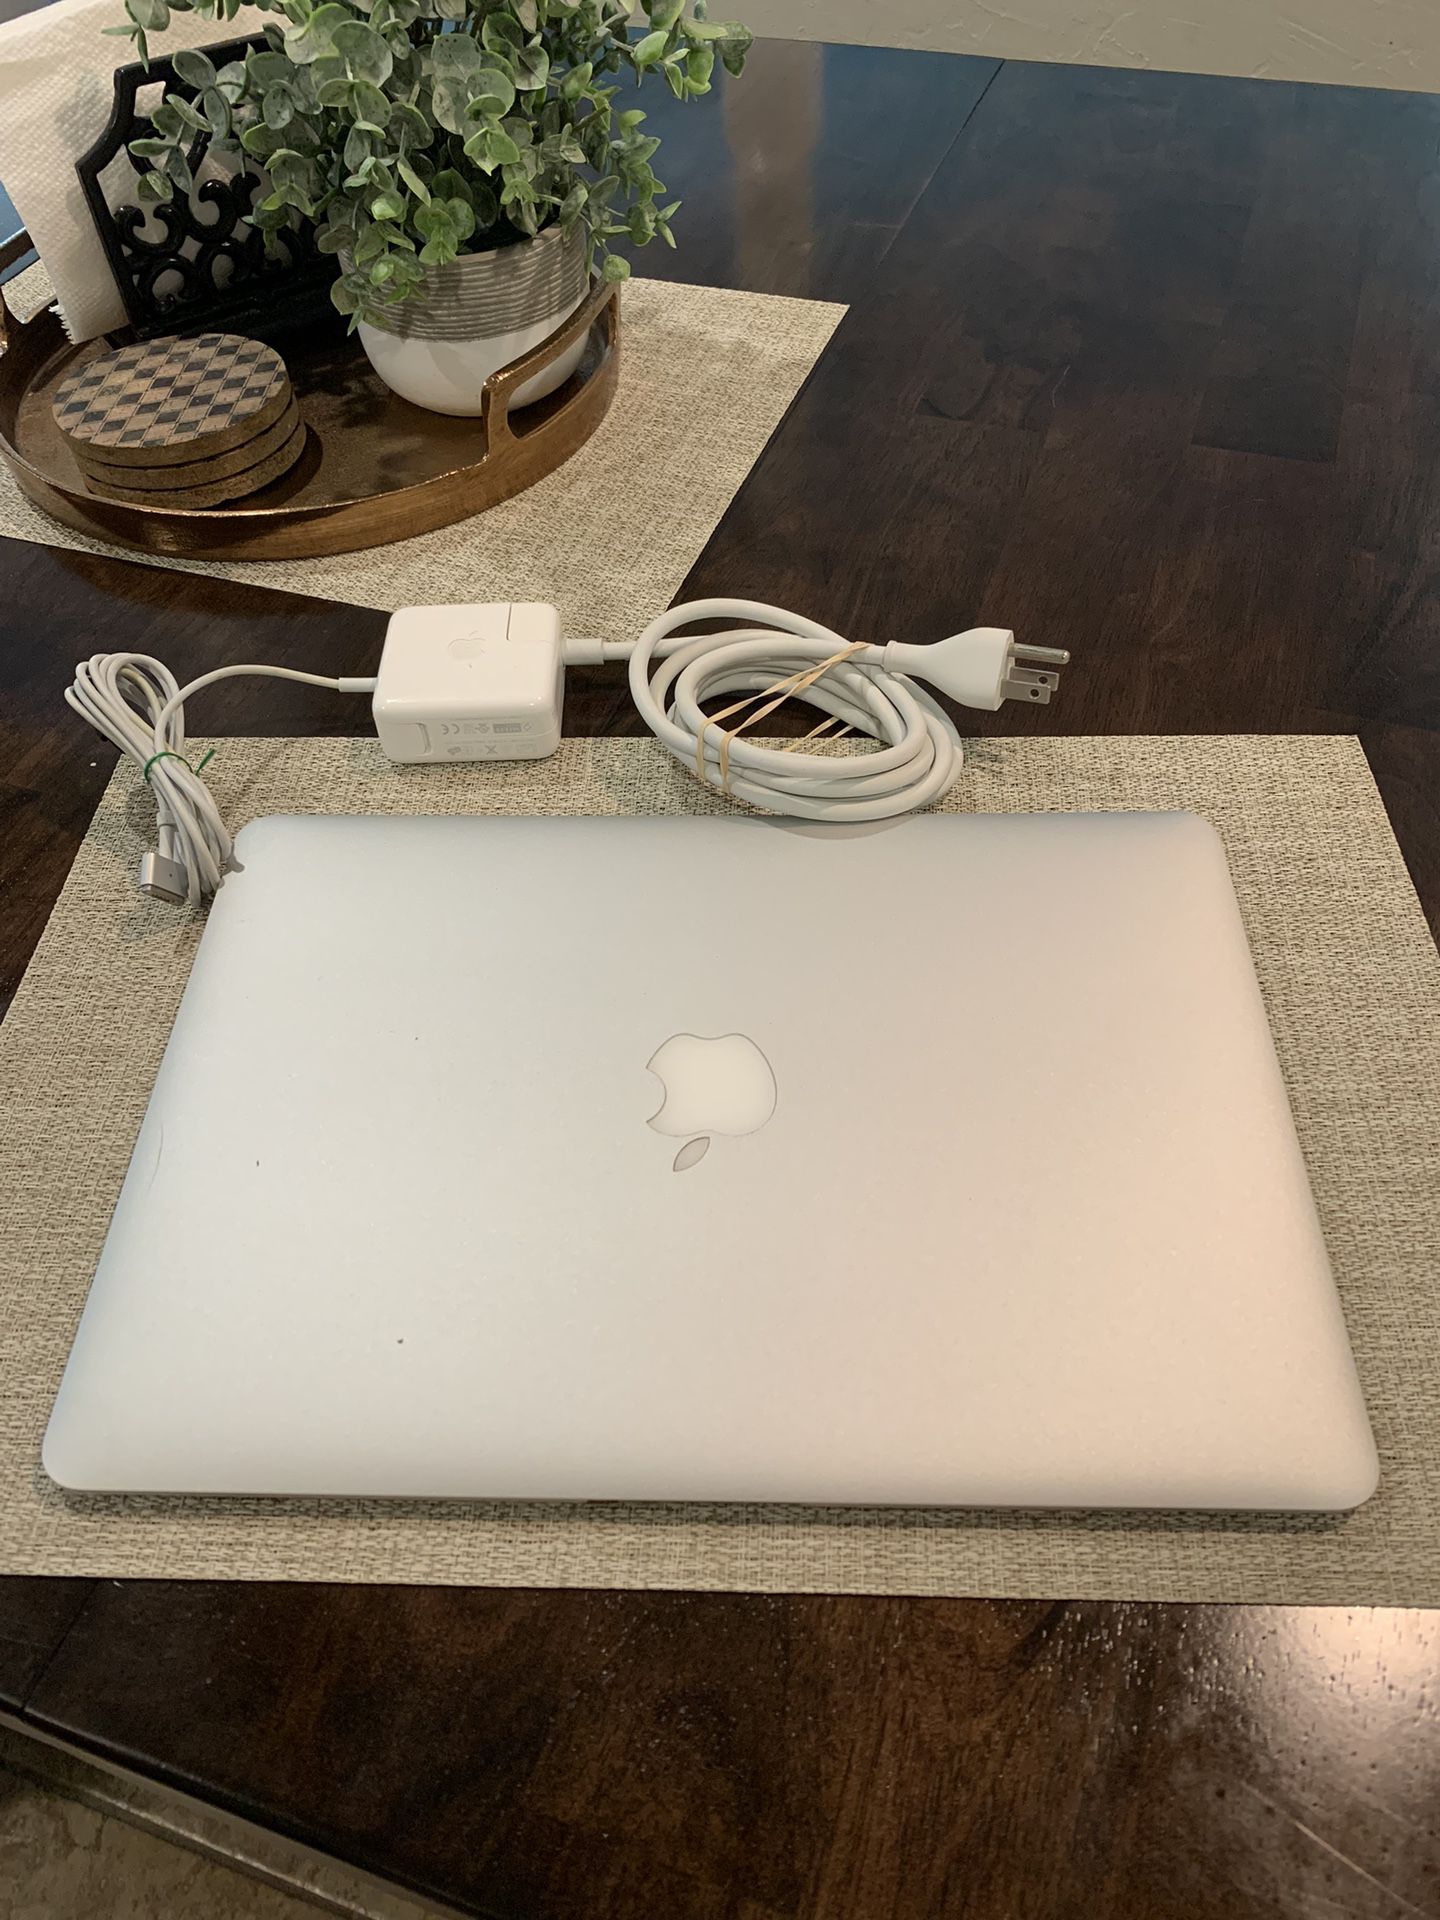 Apple Macbook Air Mid 2012 with i5 processor